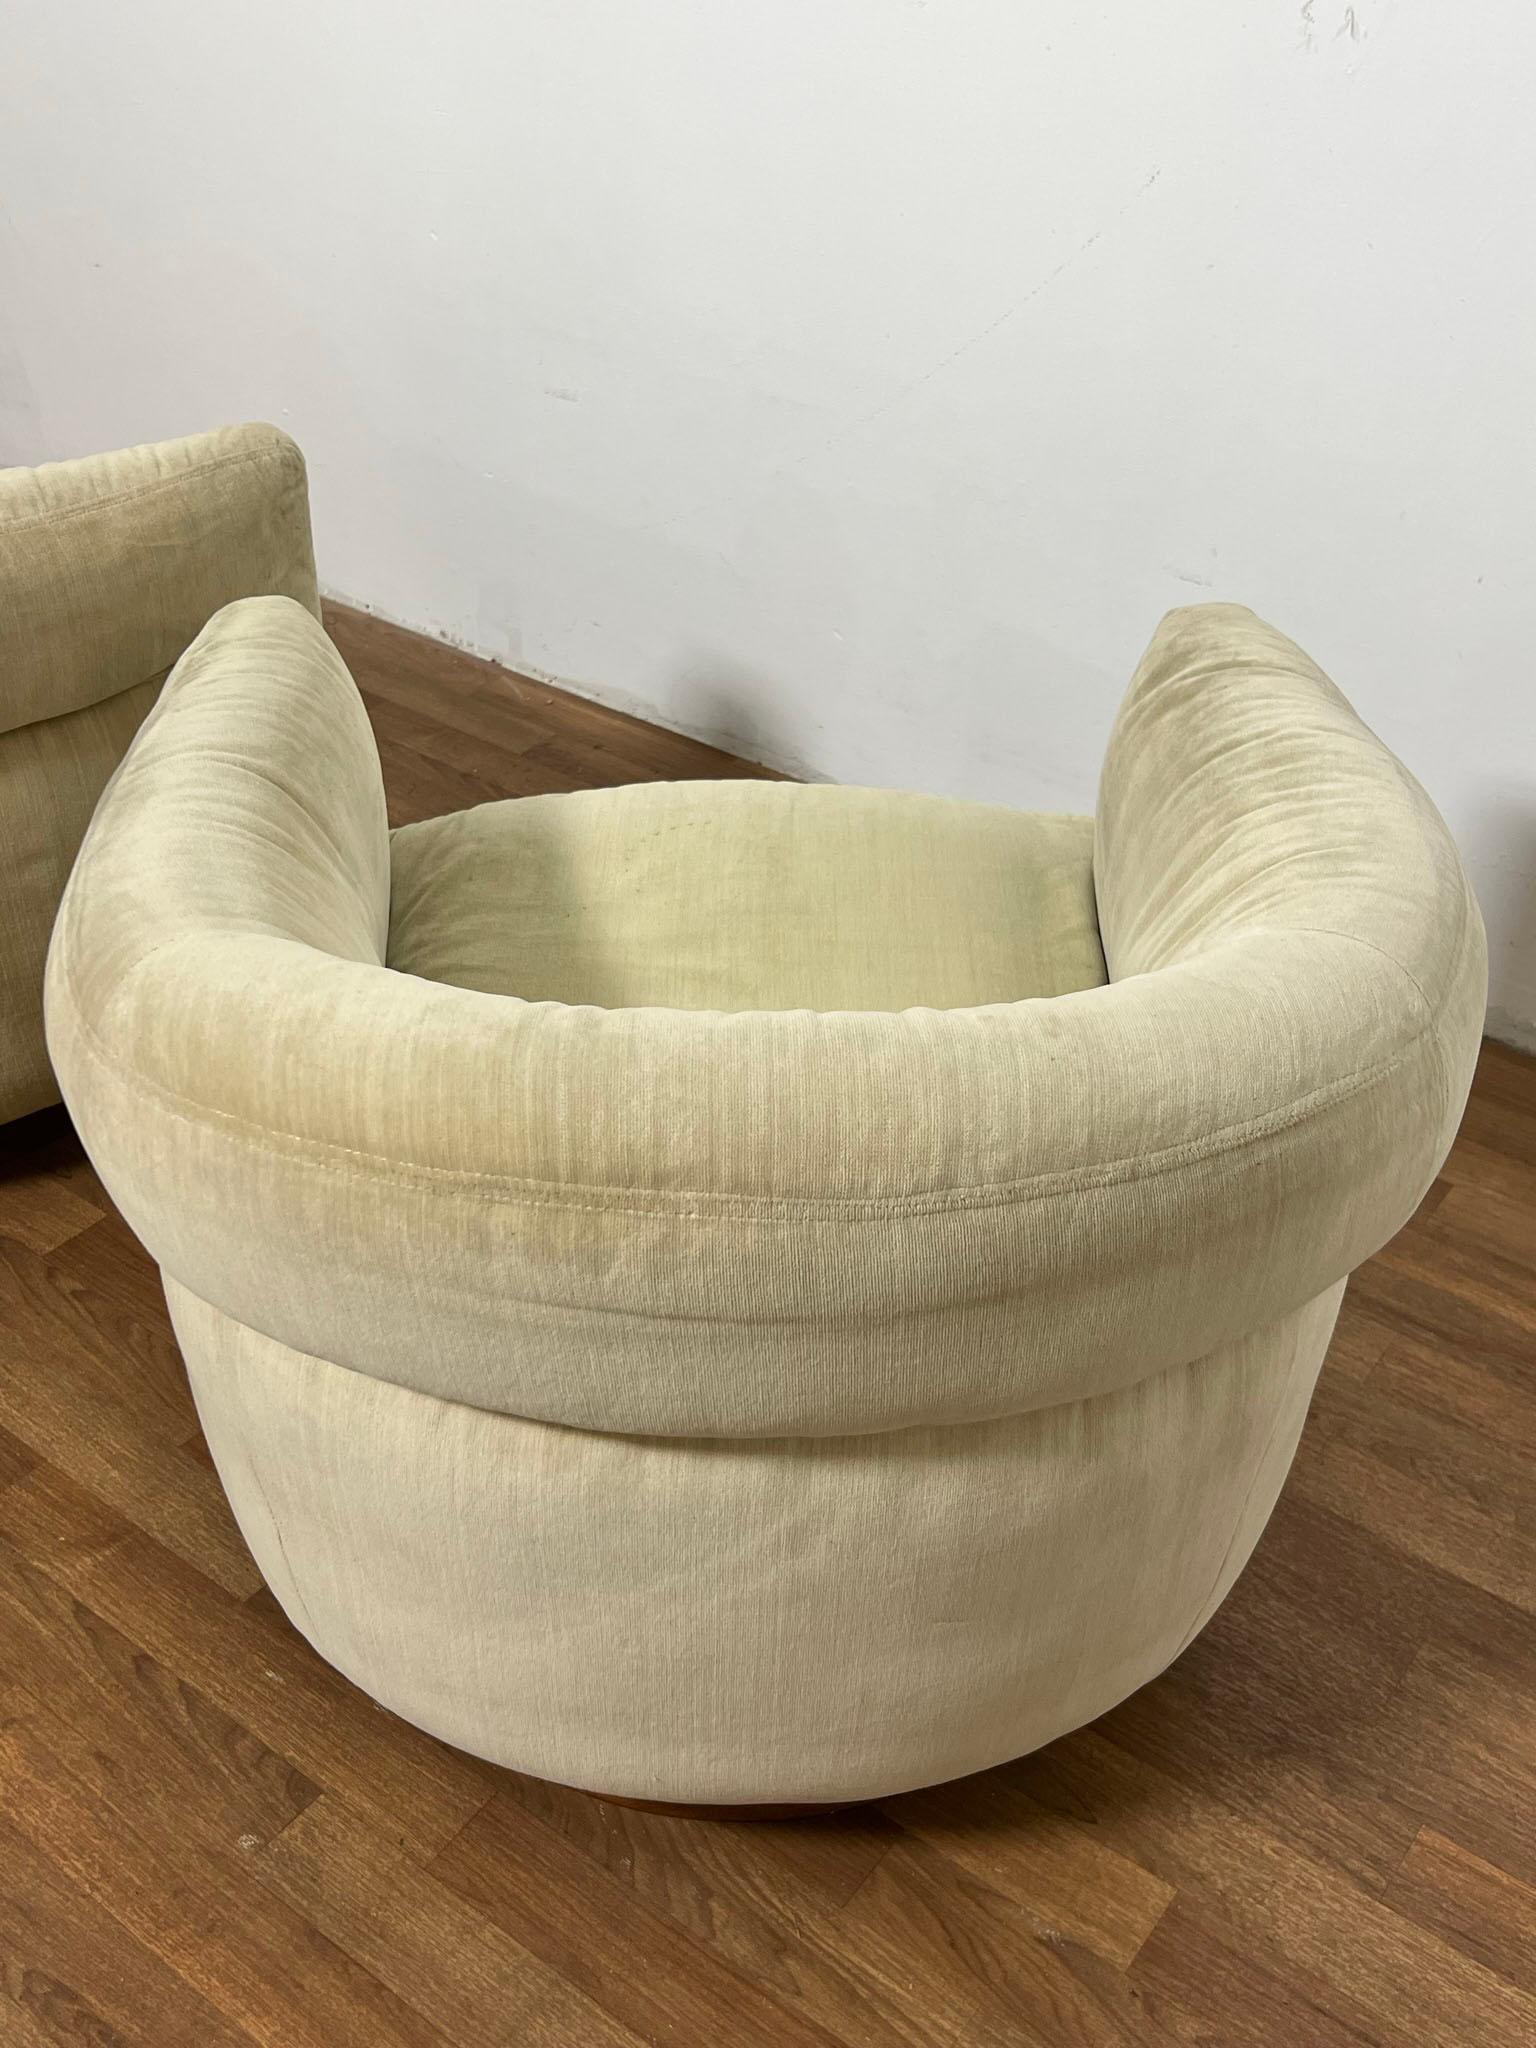 Late 20th Century Pair of Signed Milo Baughman for Thayer Coggin Swivel Tub Chairs Ca. 1970s